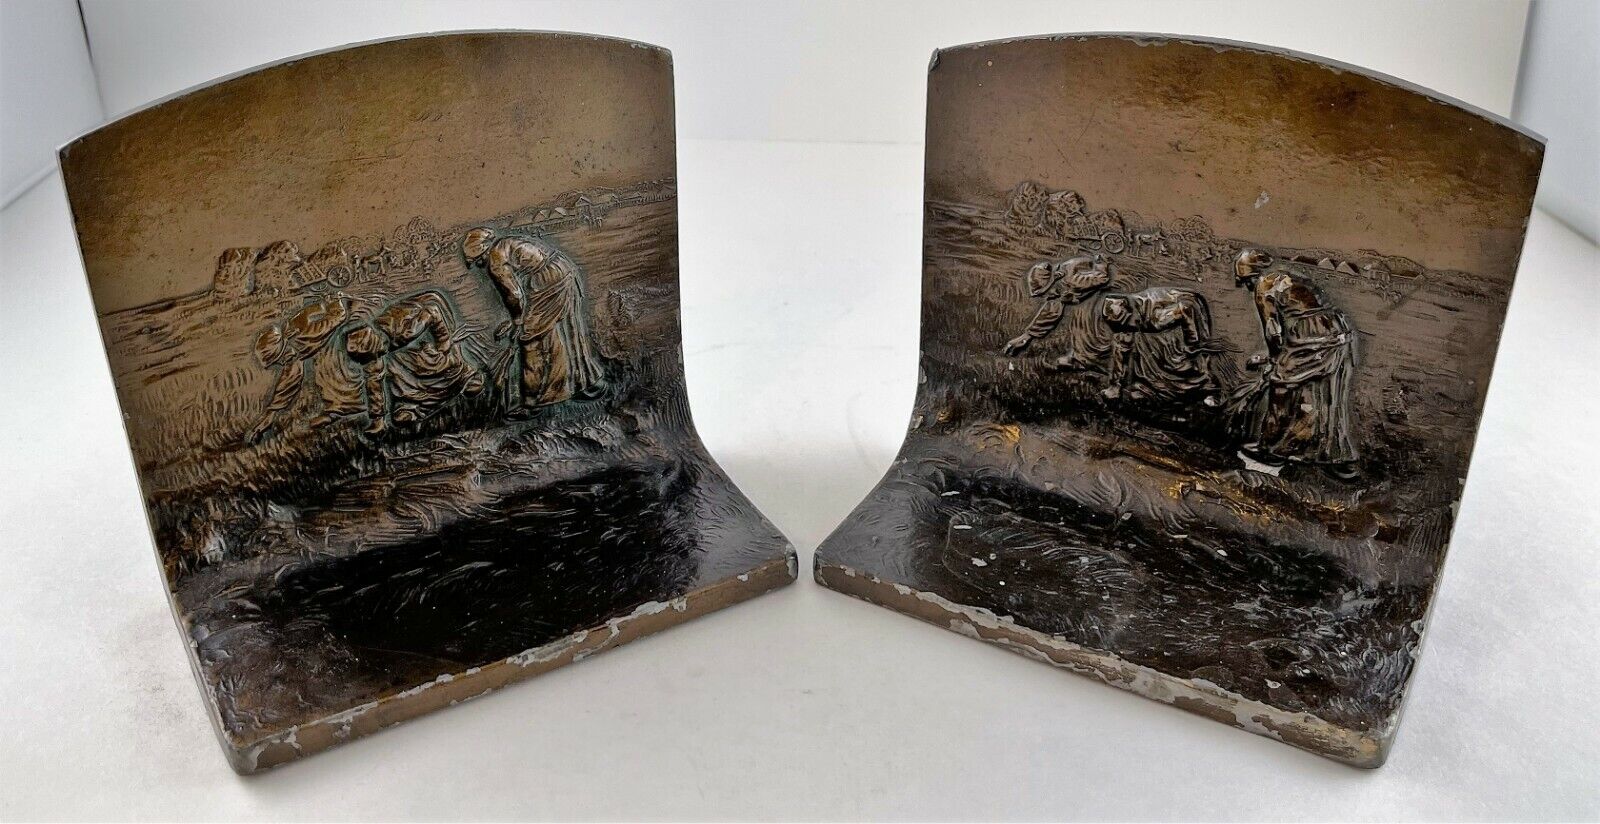 Antique K&O Heavy Book ends - The Gleaners